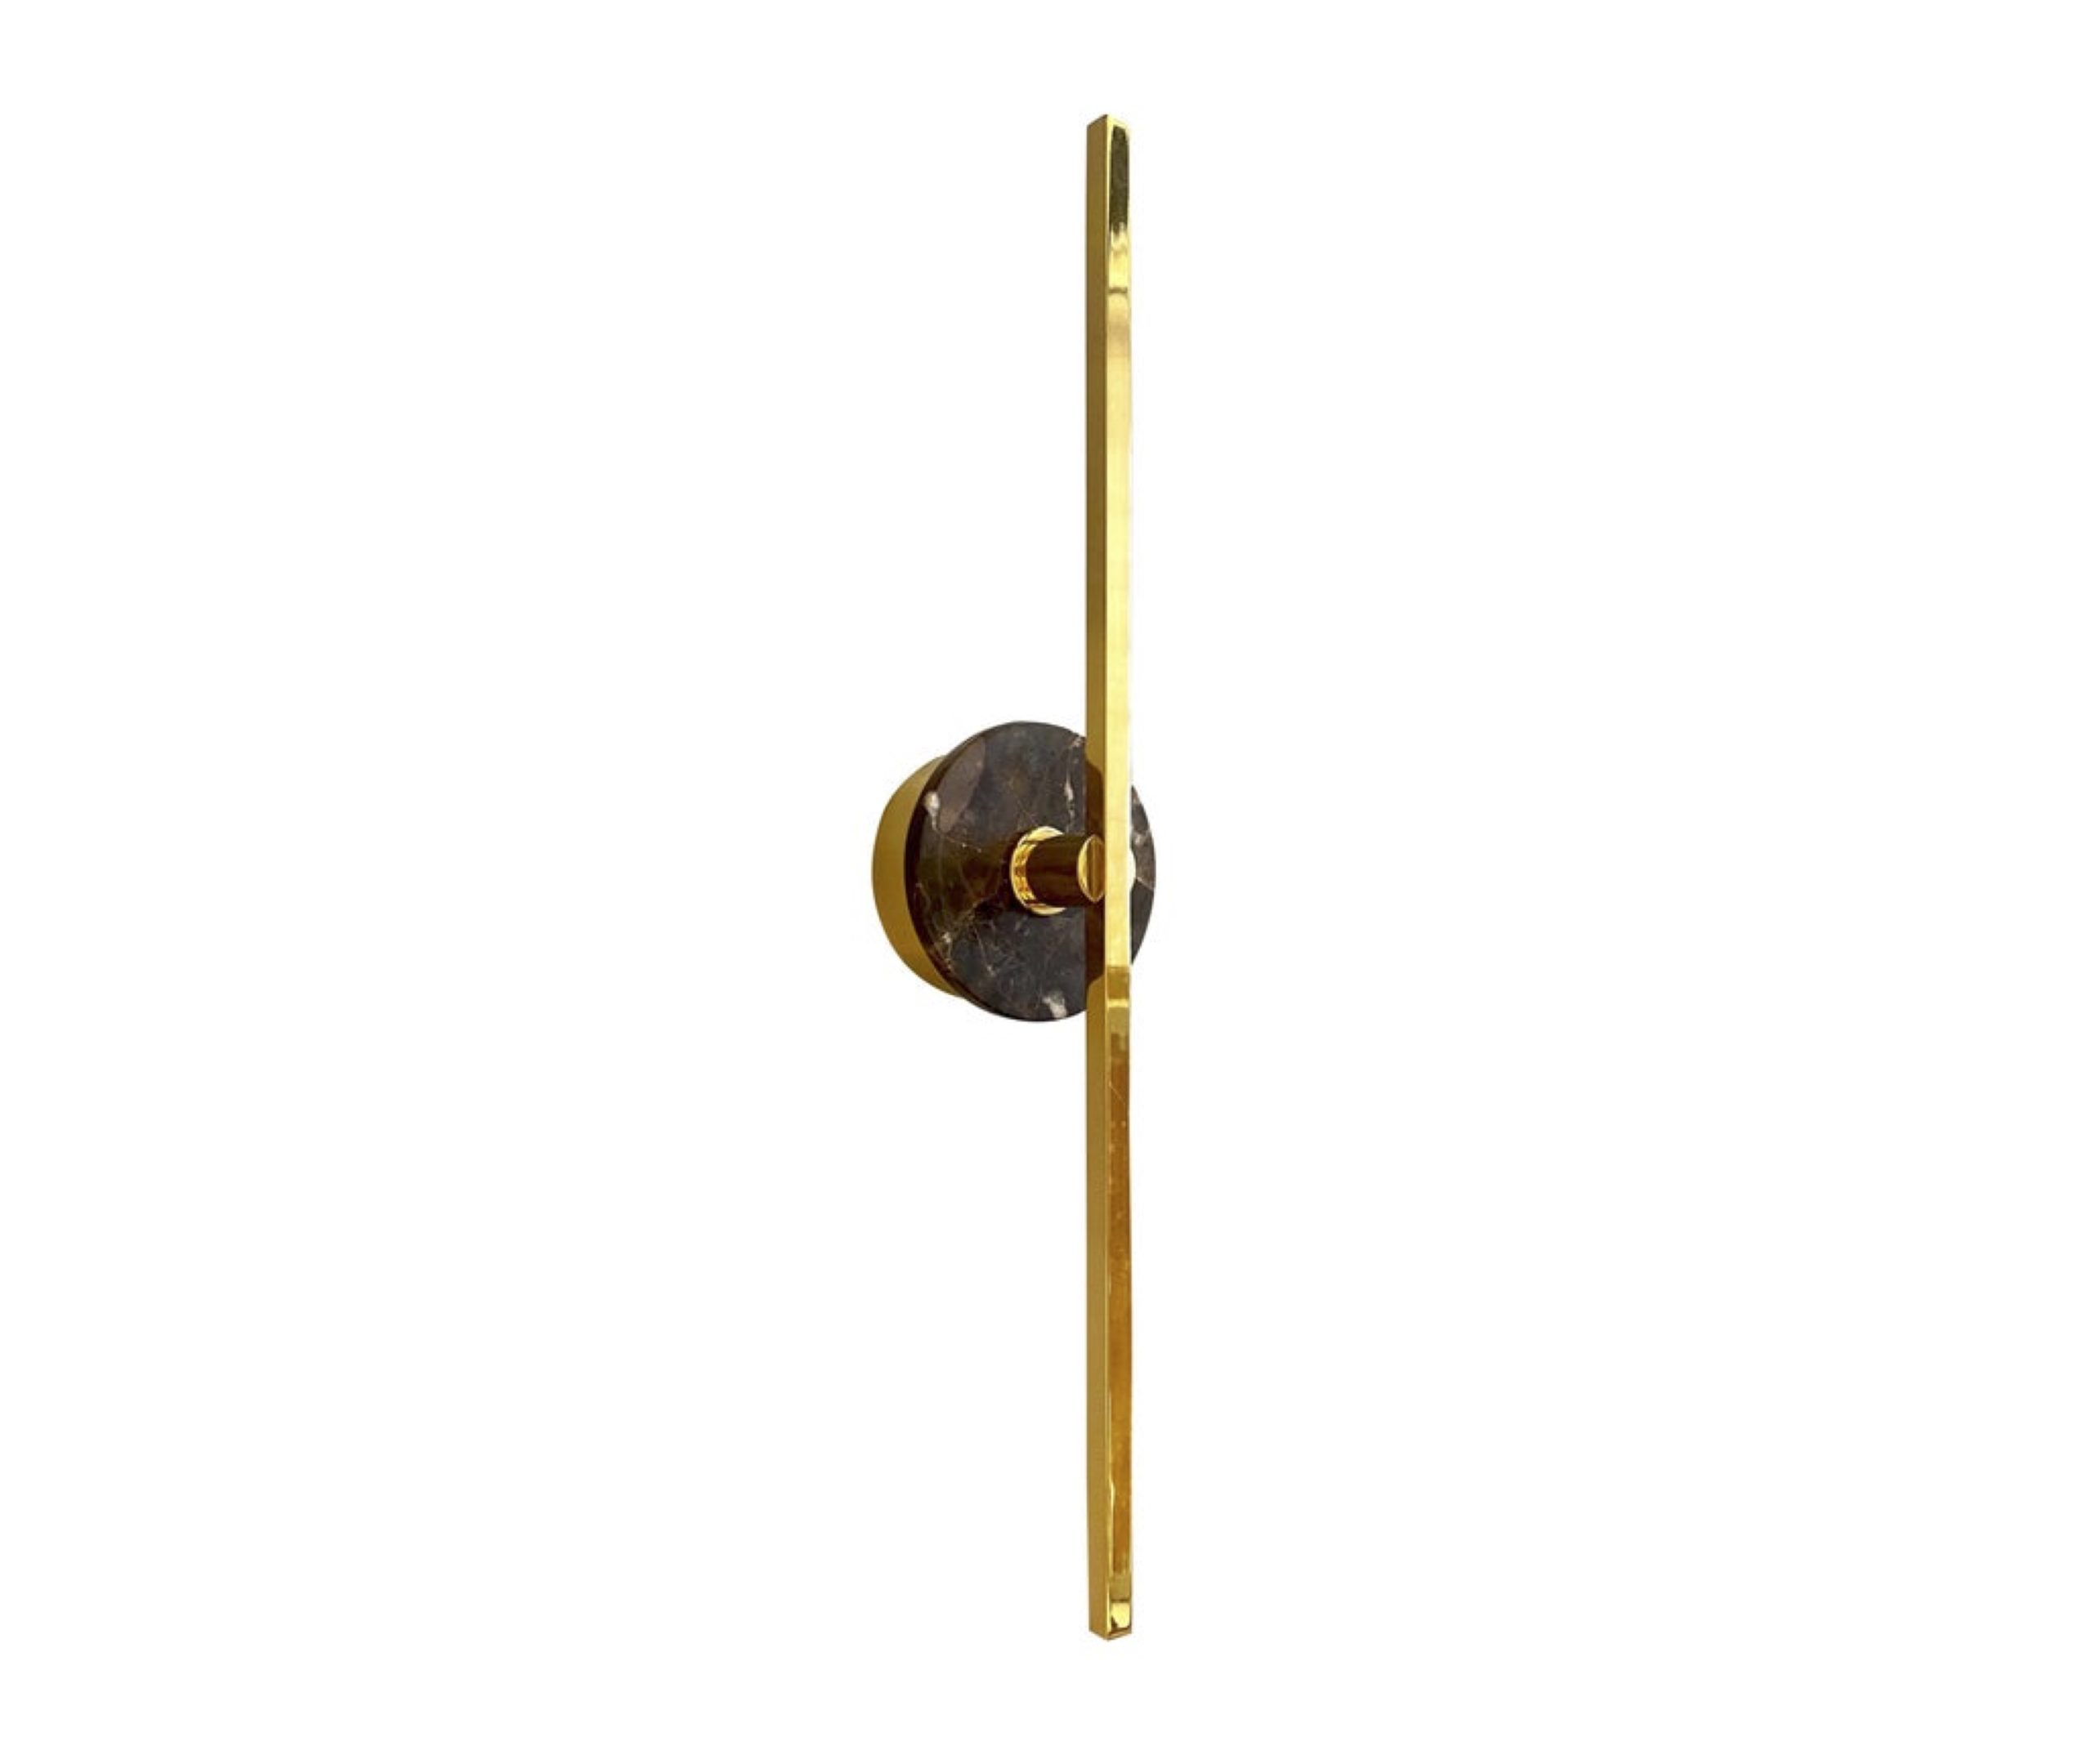 cosulich_interiors_and_antiques_products_new_york_design_bespoke_italian_minimalist_brown_marble_satin_brass_vertical_horizontal_sconce-scaled-1